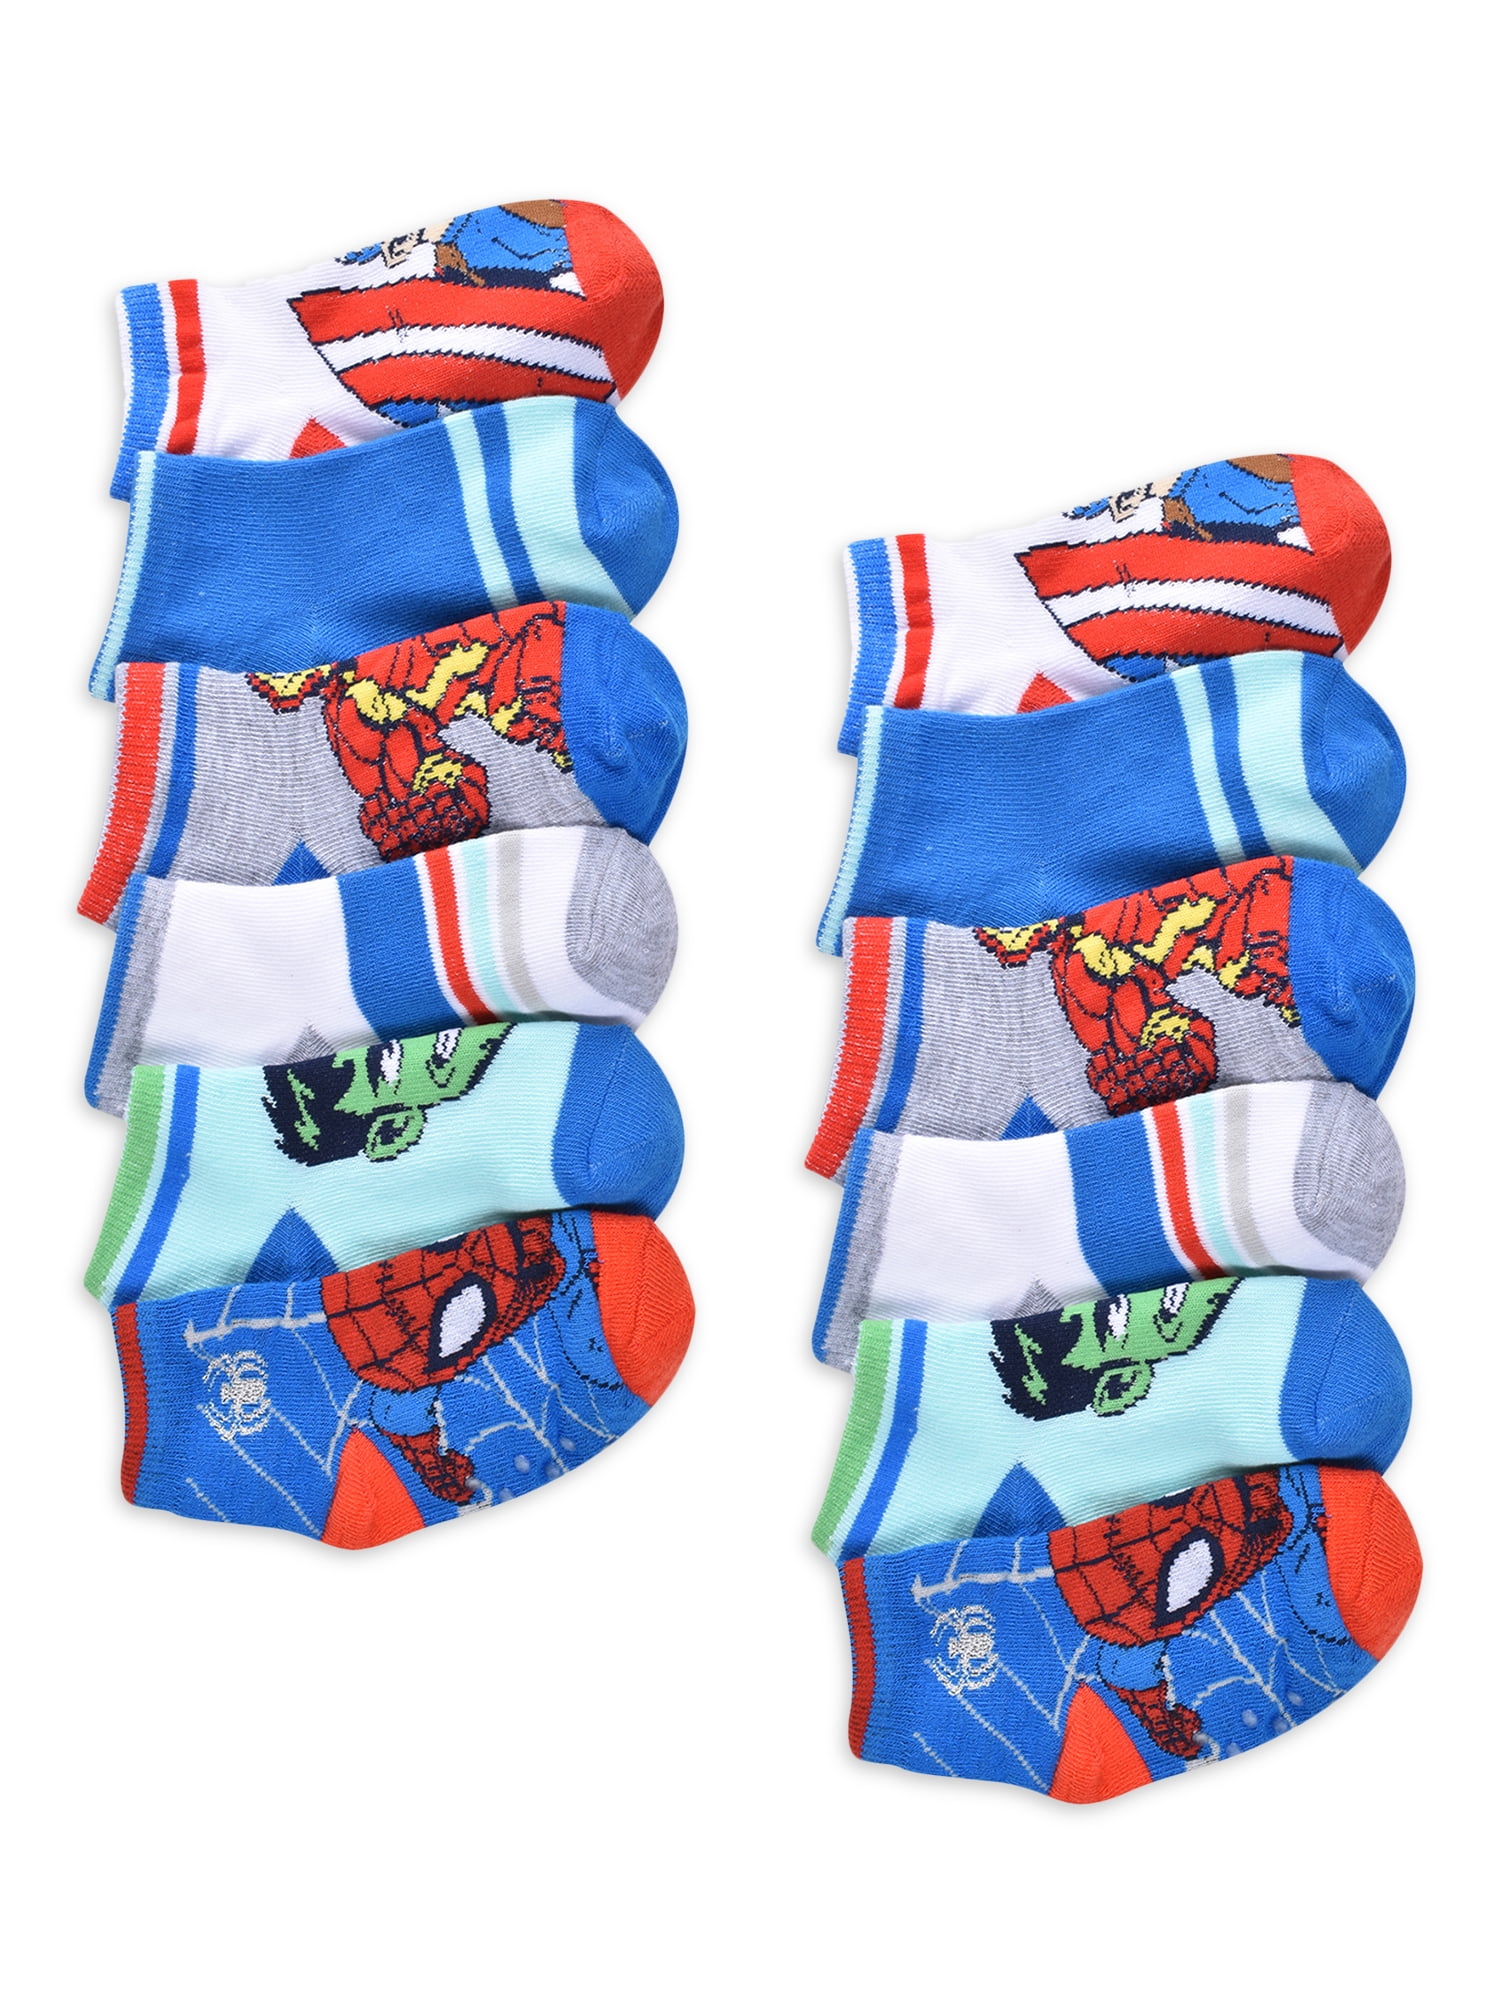 5 Pairs . 18-24 Months Marvel SuperHero Boys Gripper Socks W/Safety Toes NEW! 